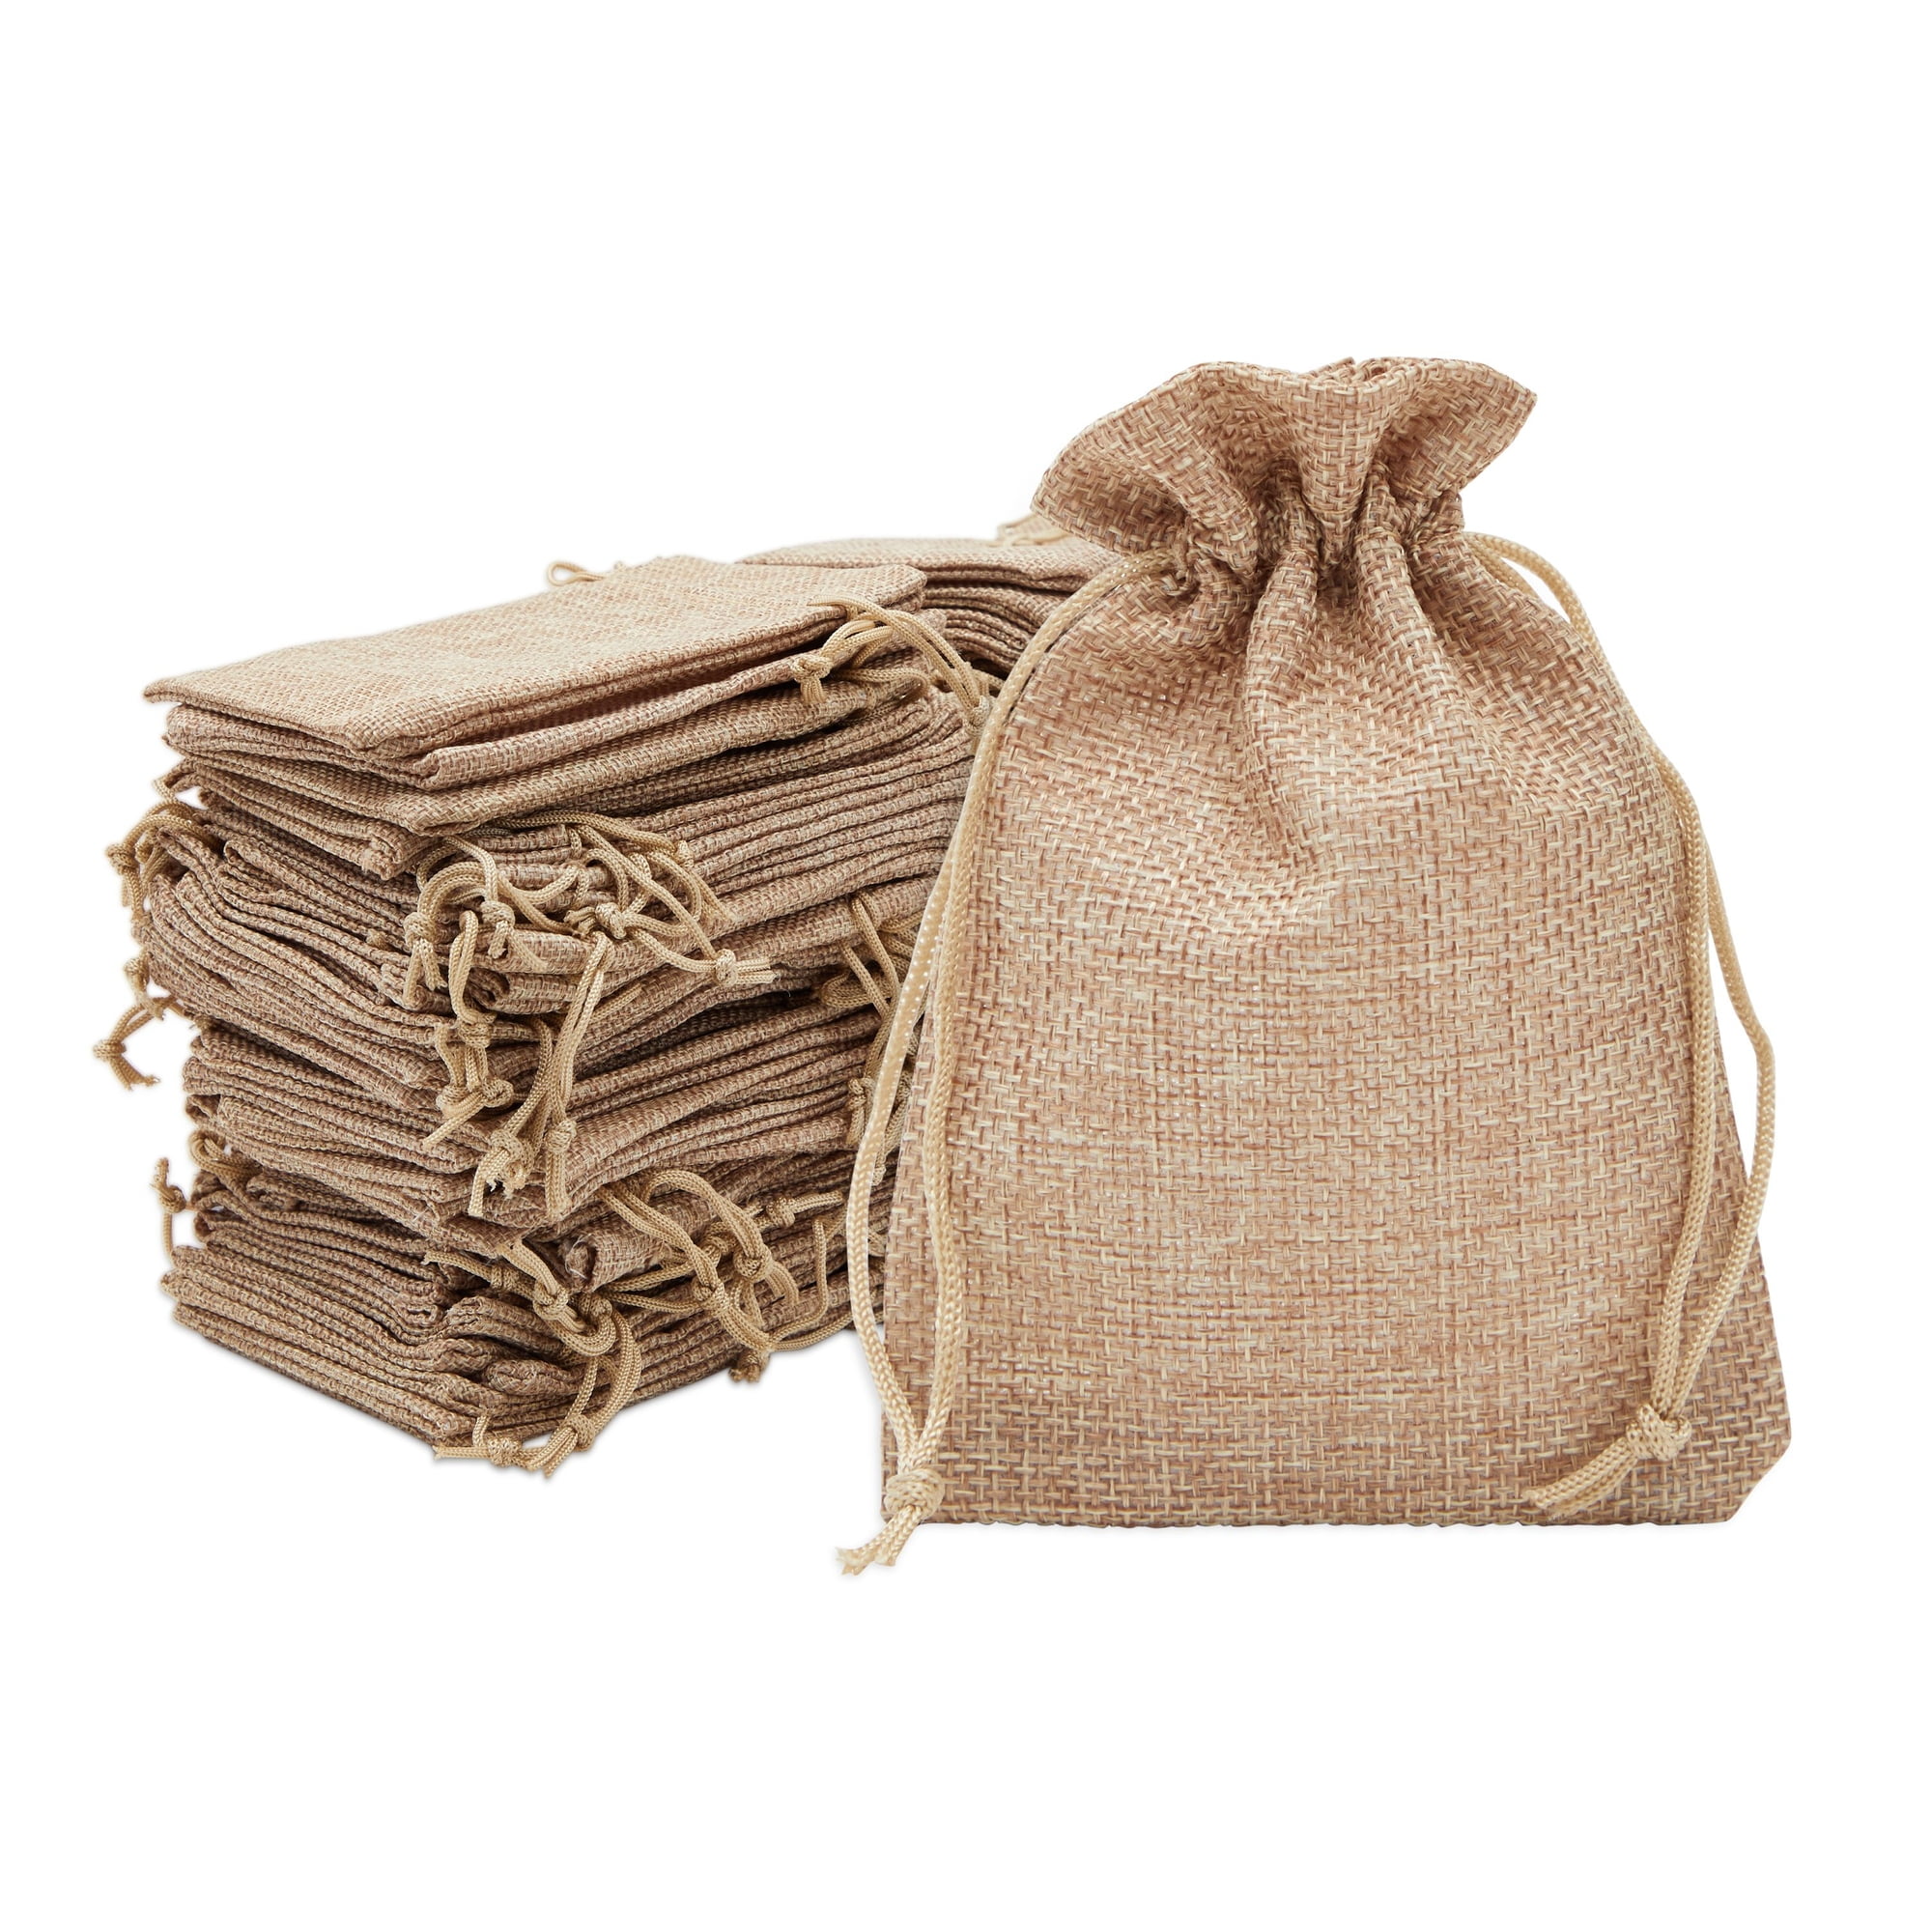 CleverDelights 18 x 24 Burlap Bags with Natural Jute Drawstring - 6 Pack